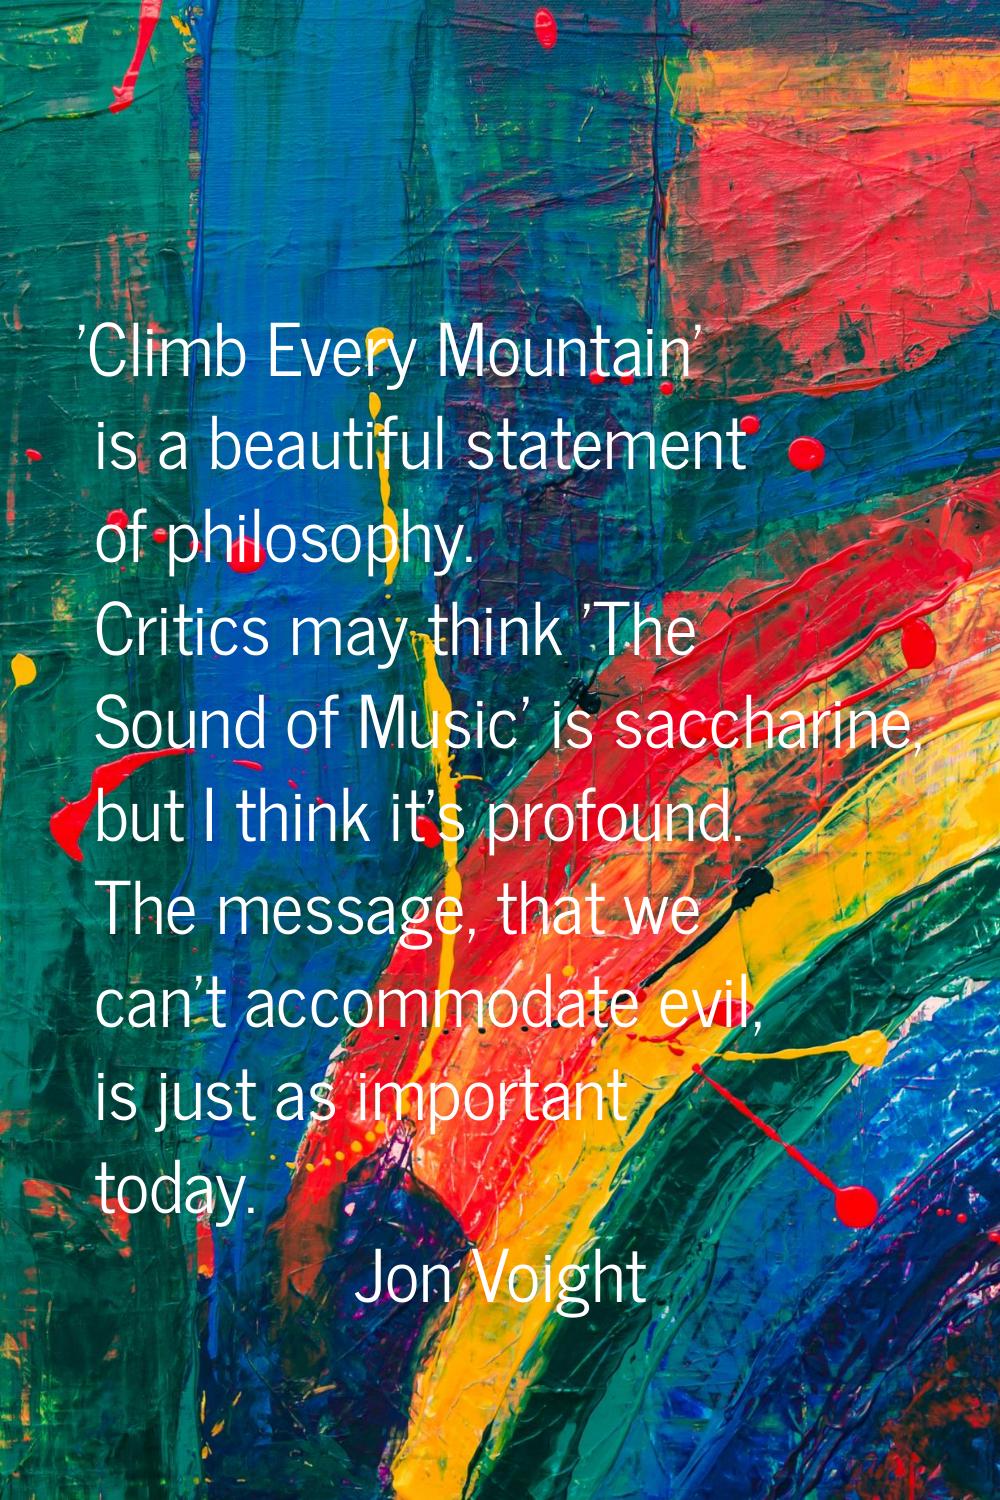 'Climb Every Mountain' is a beautiful statement of philosophy. Critics may think 'The Sound of Musi